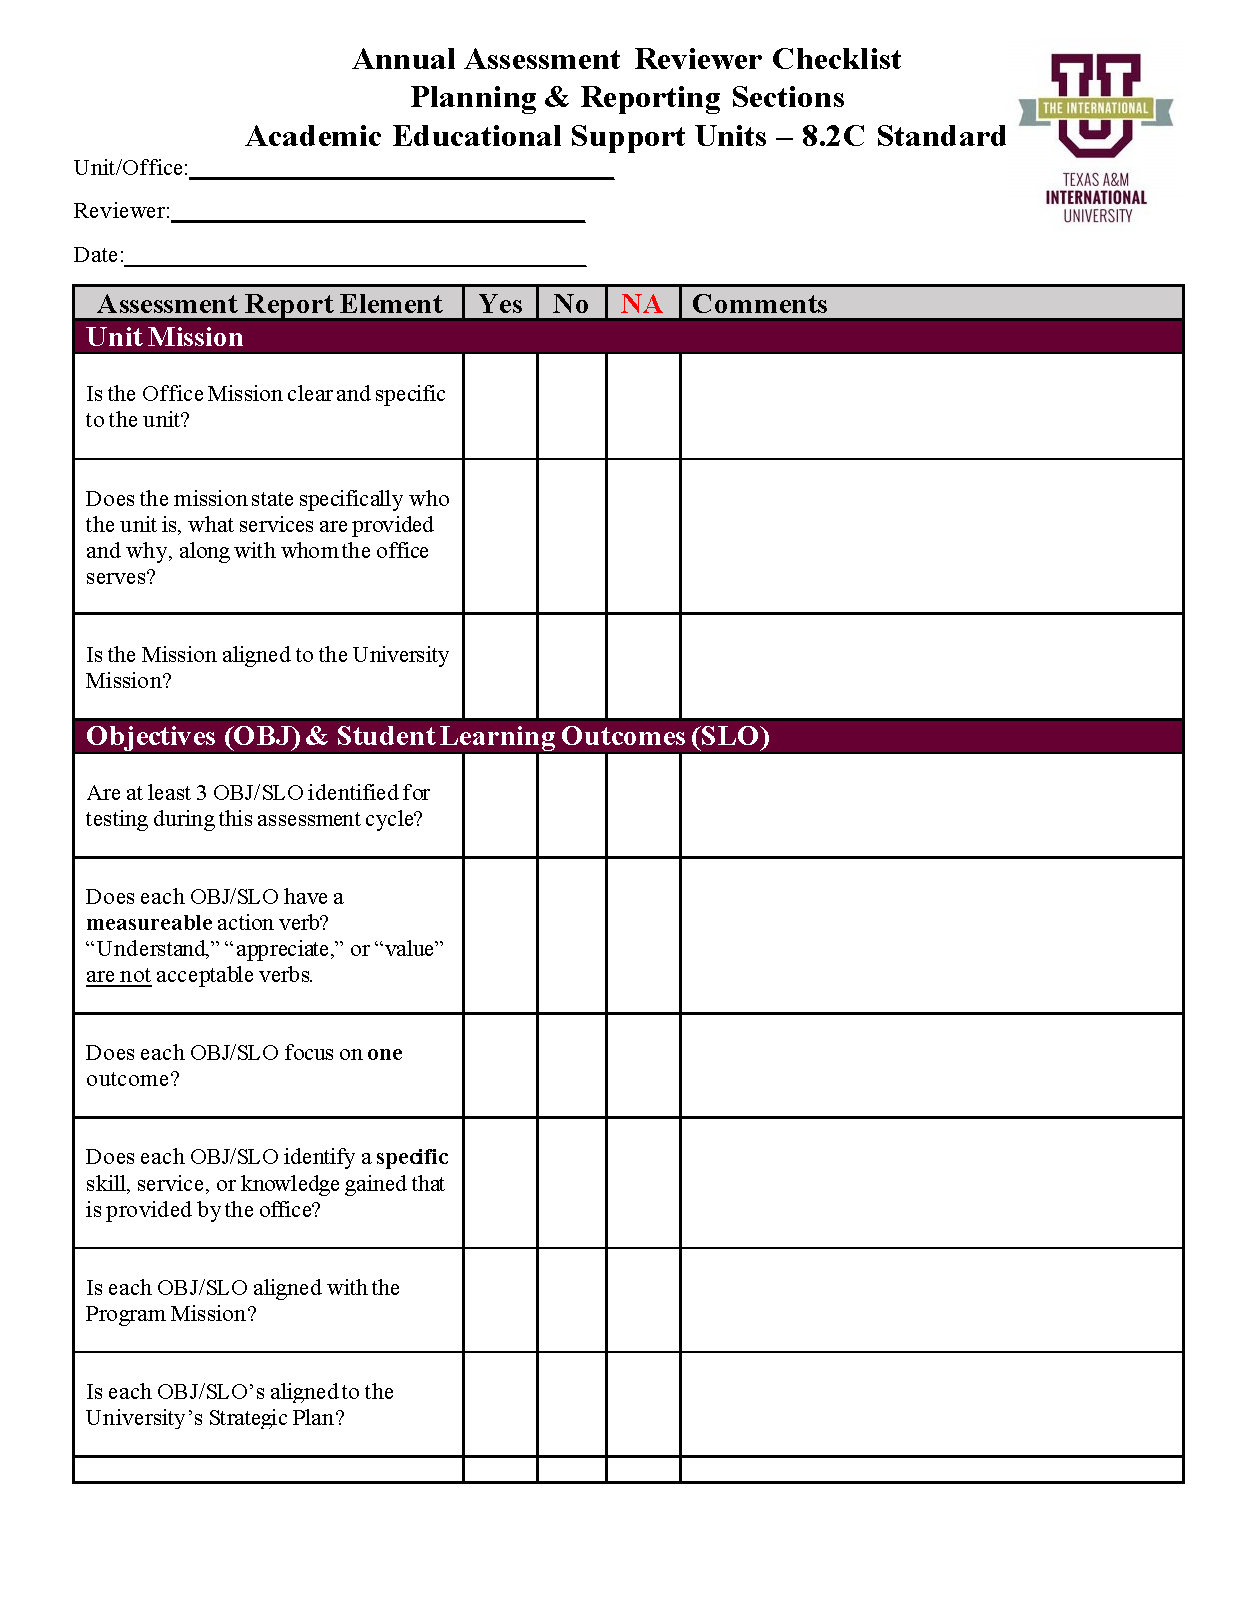 Reviewer Checklist AES (Plan &amp; Report) 2021 - 2022 Image